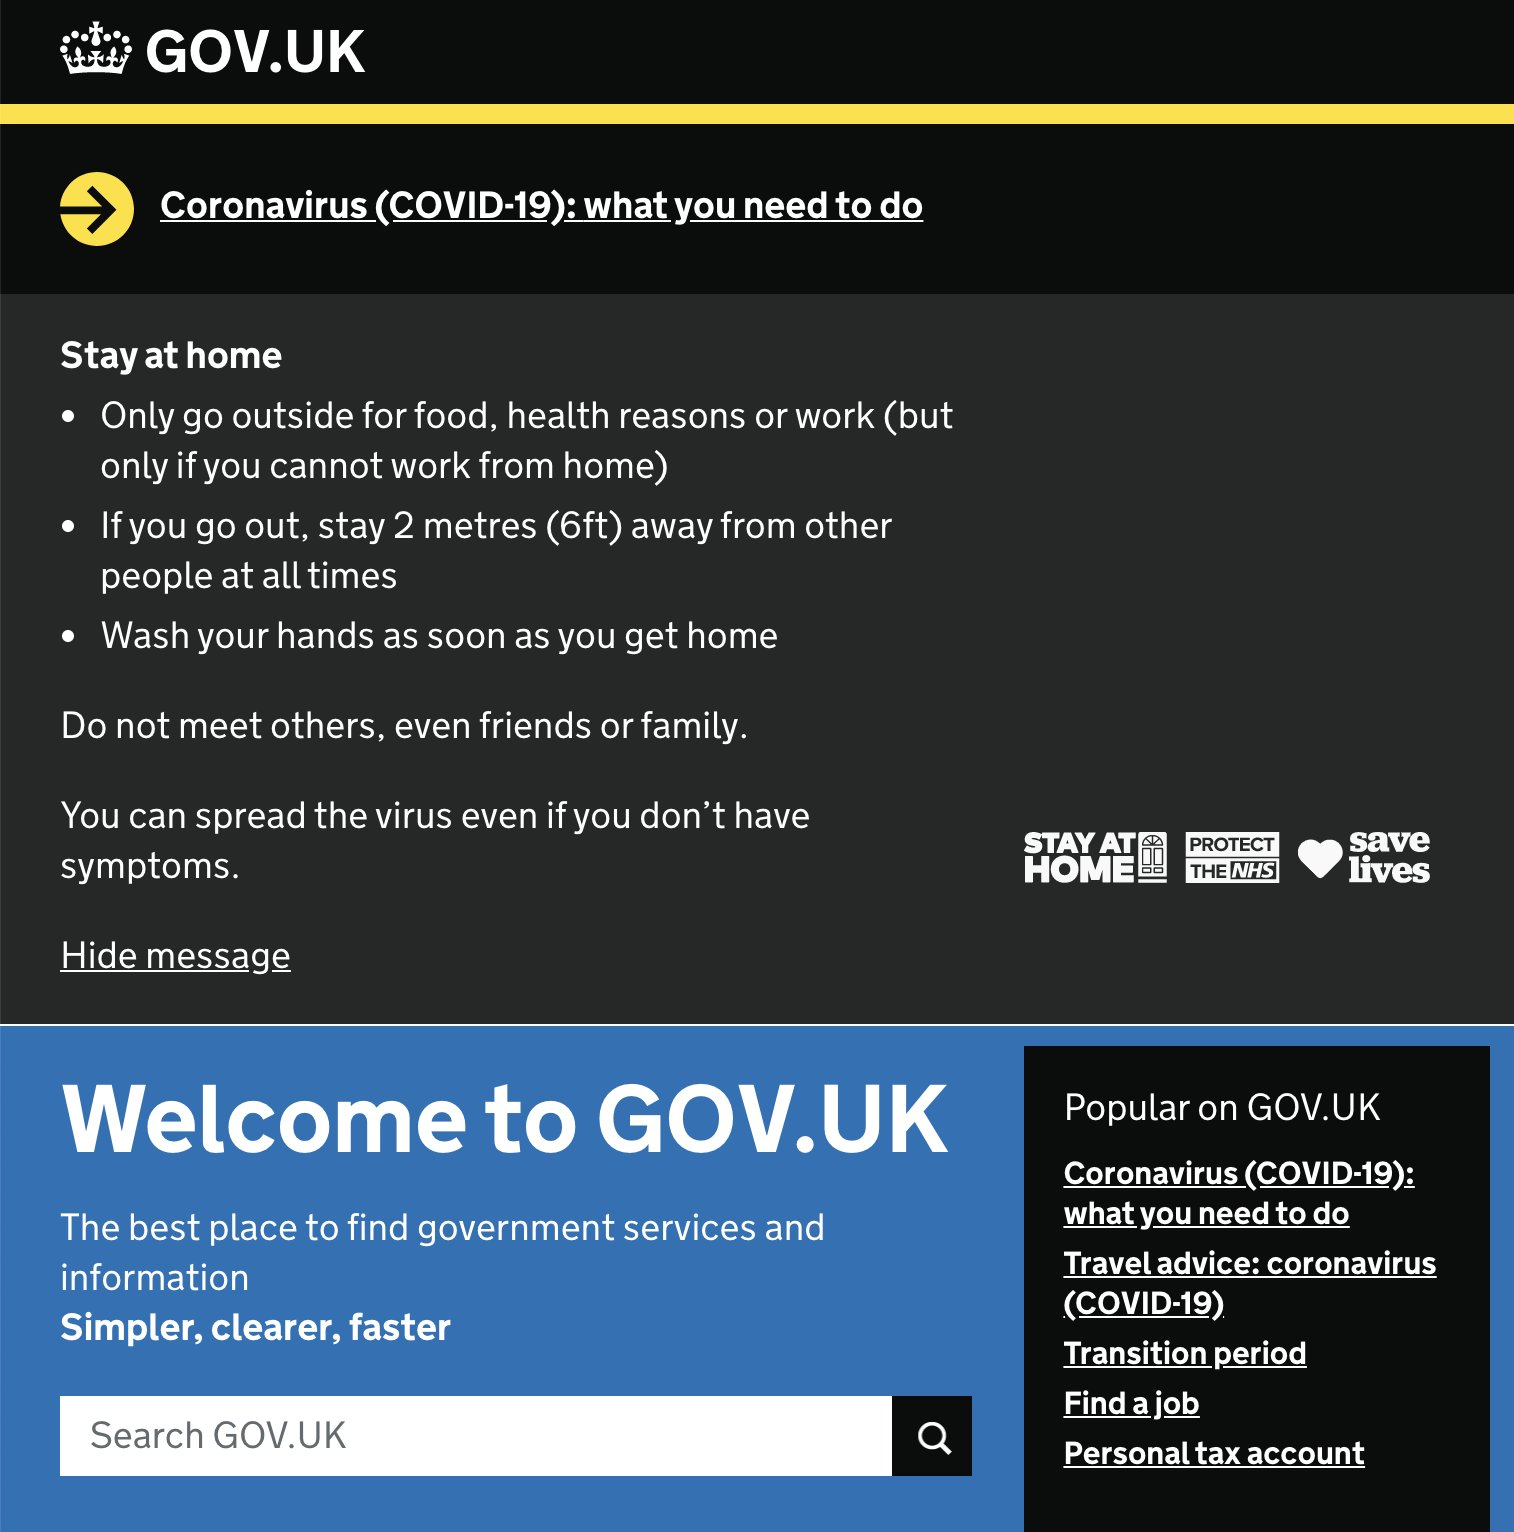 A large dark gray banner taking up two thirds of the screenshot of the Gov.uk homepage. The banner has a heading, body copy, three small logos, and a hide message button. The heading reads, 'Coronavirus (COVID-19): what you need to do'. The body copy reads, 'Stay at home. Only go outside for food, health reasons or work (but only if you cannot work from home). If you go out, stay 2 metres (6ft) away from other people at all times. Wash your hands as soon as you get home. Do not meet others, even friends or family. You can spread the virus even if you don't have symptoms.' The logos are for Stay At Home, Protect the NHS, and Save Lives programs.